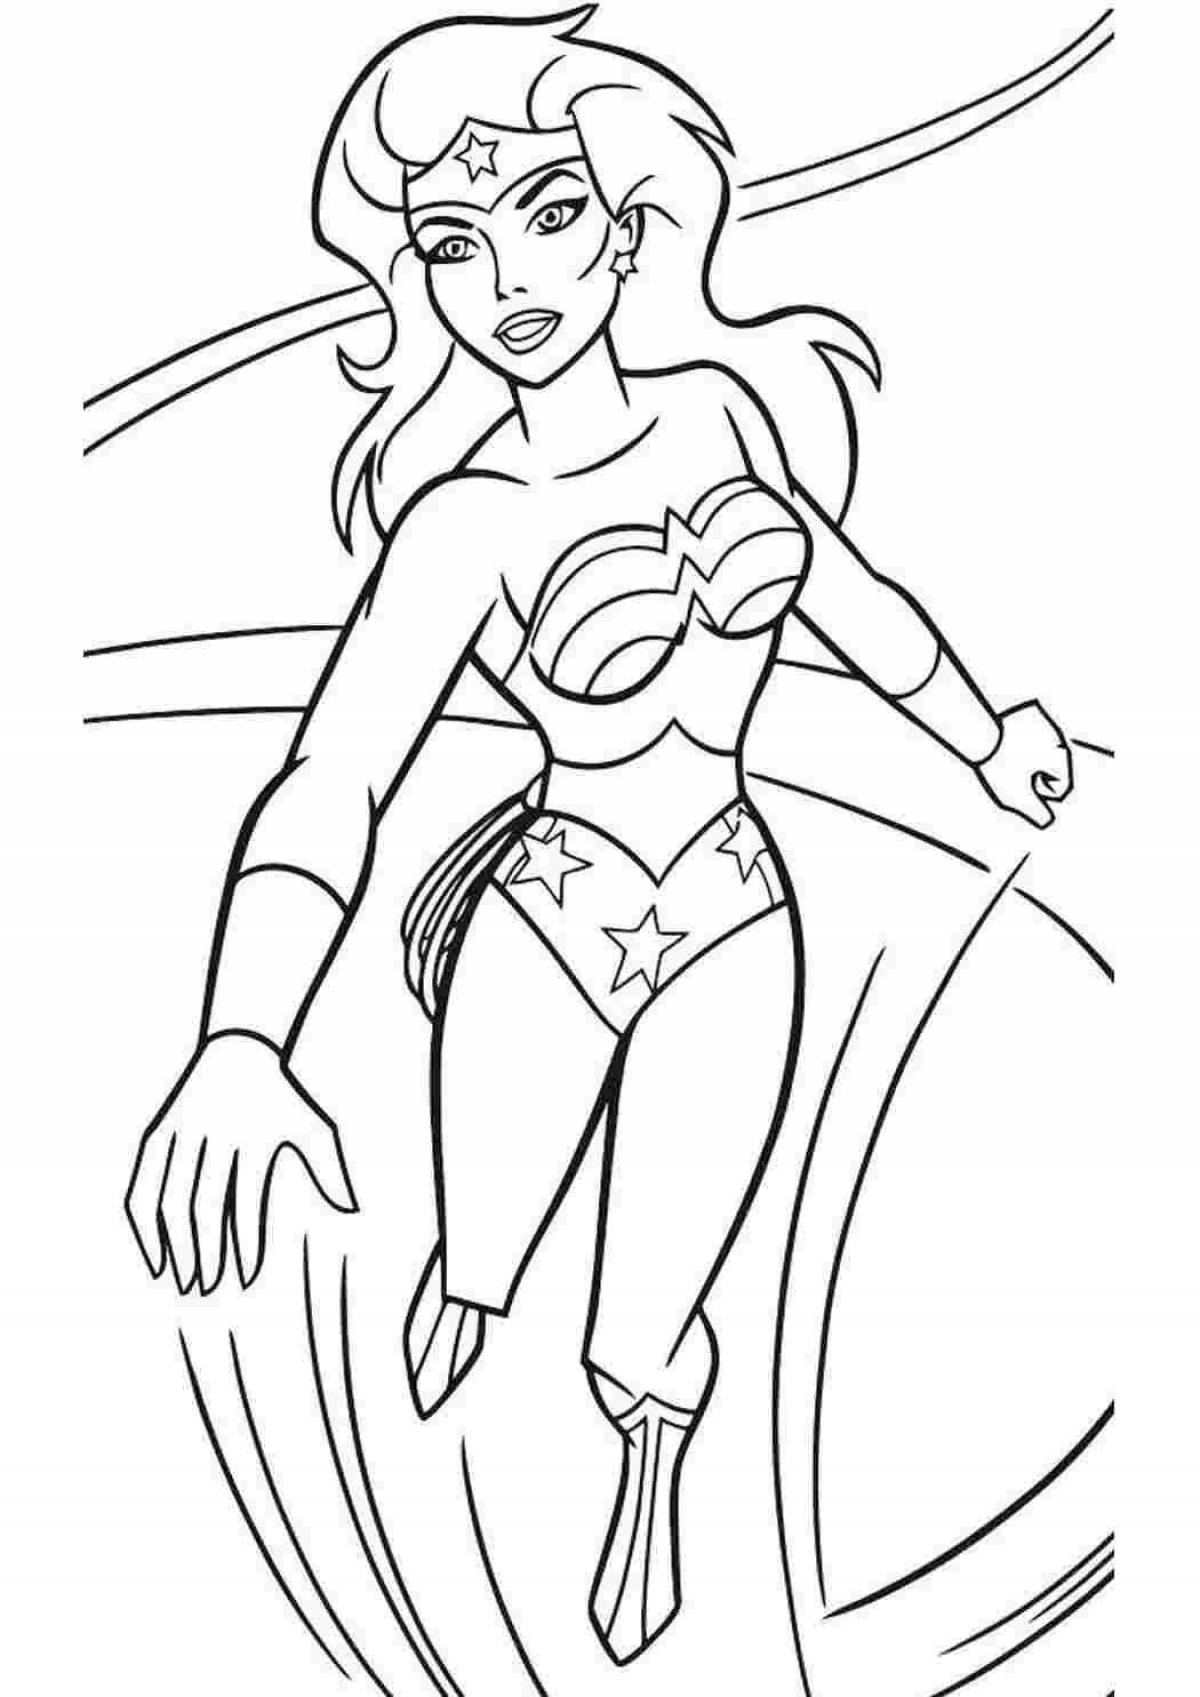 Superwoman brightly colored coloring page